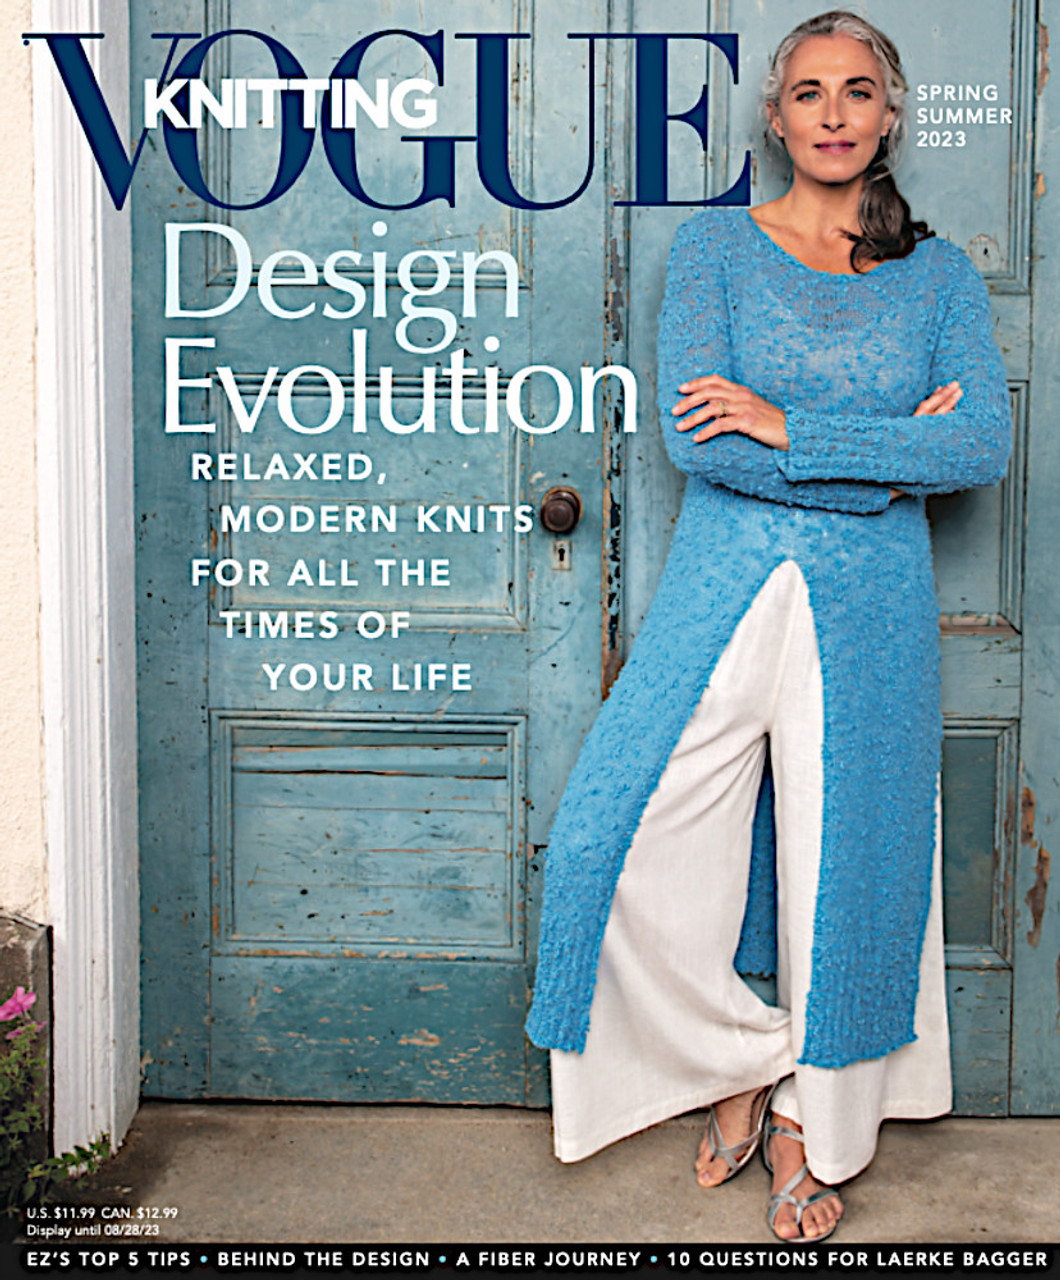 Book Review: Vogue Knitting, The Ultimate Knitting Book